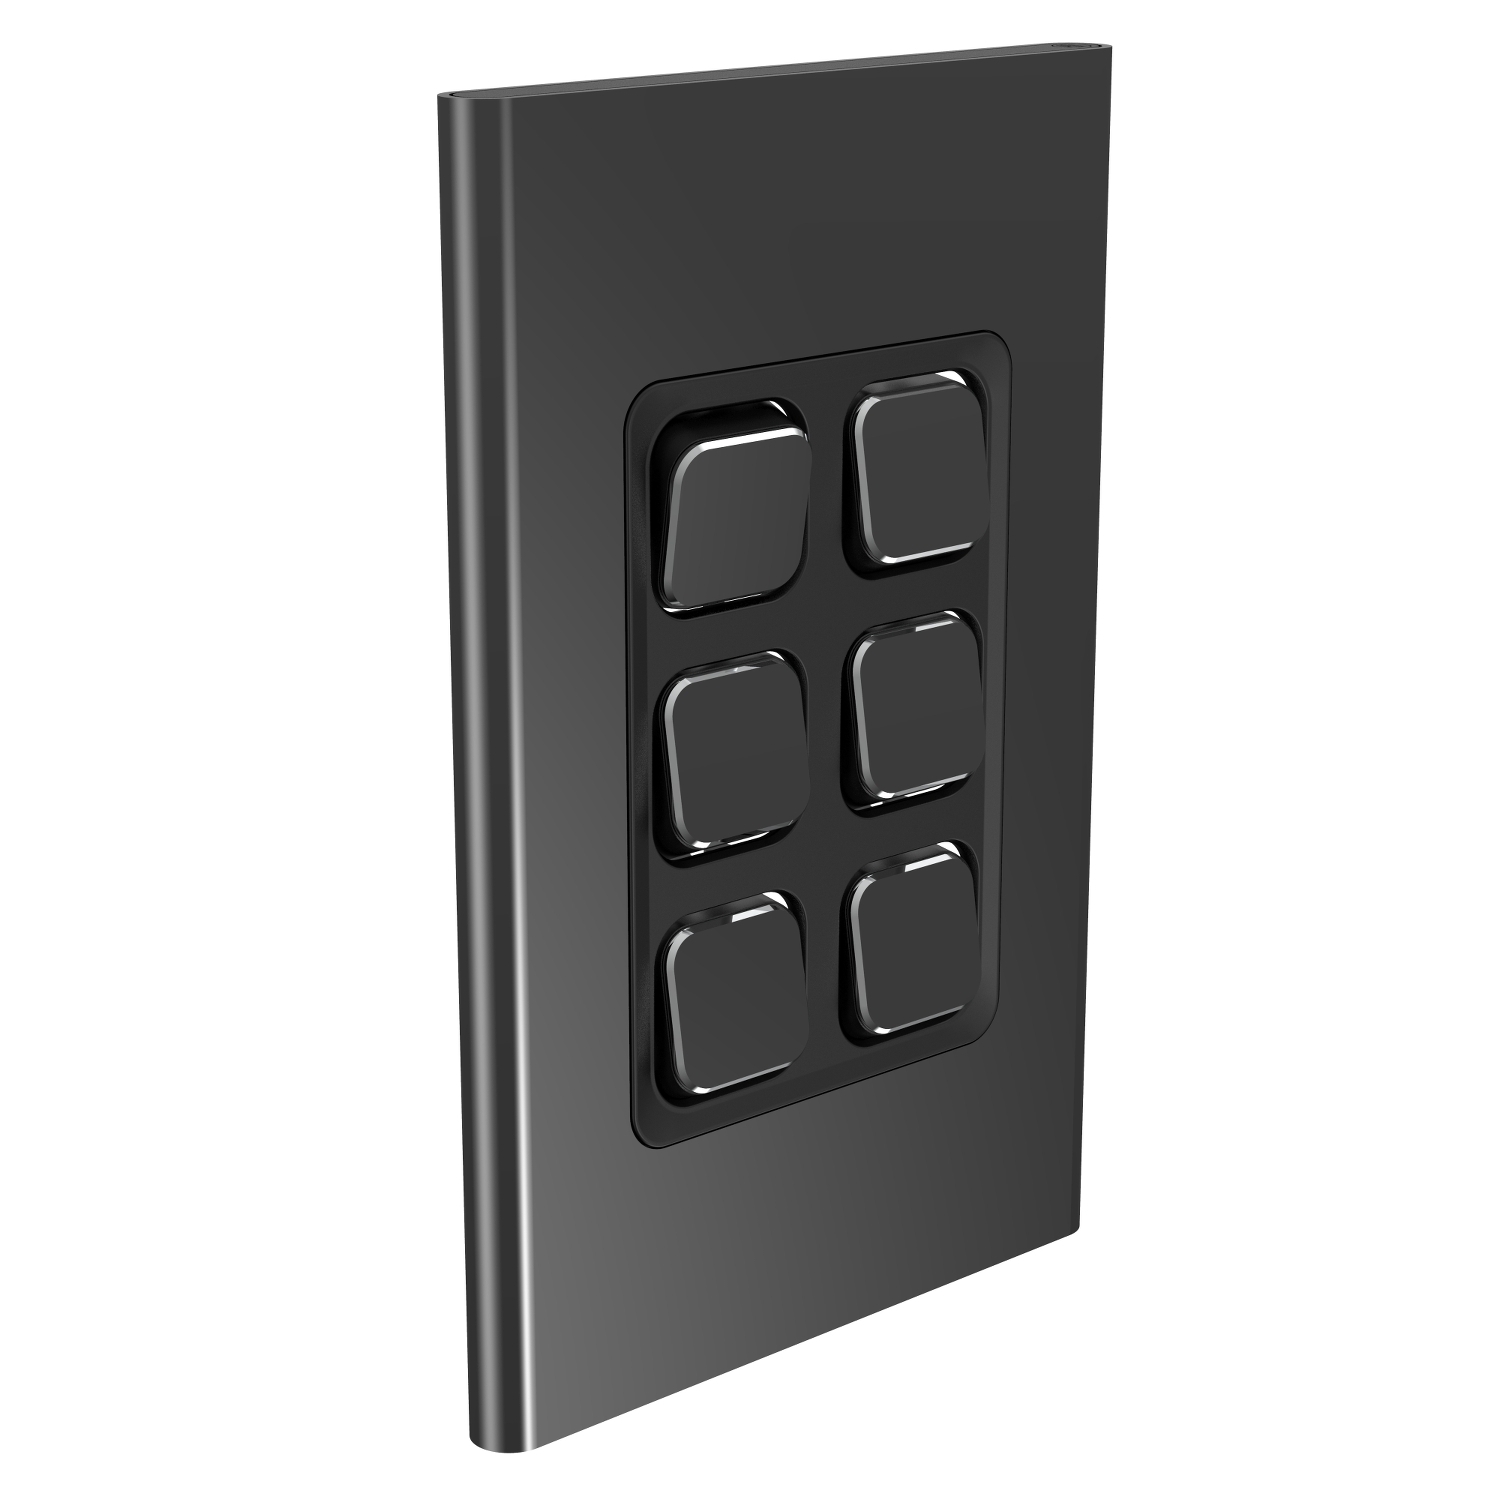 PDL Iconic Styl, cover frame, 6 switches, vertical - Silver Shadow